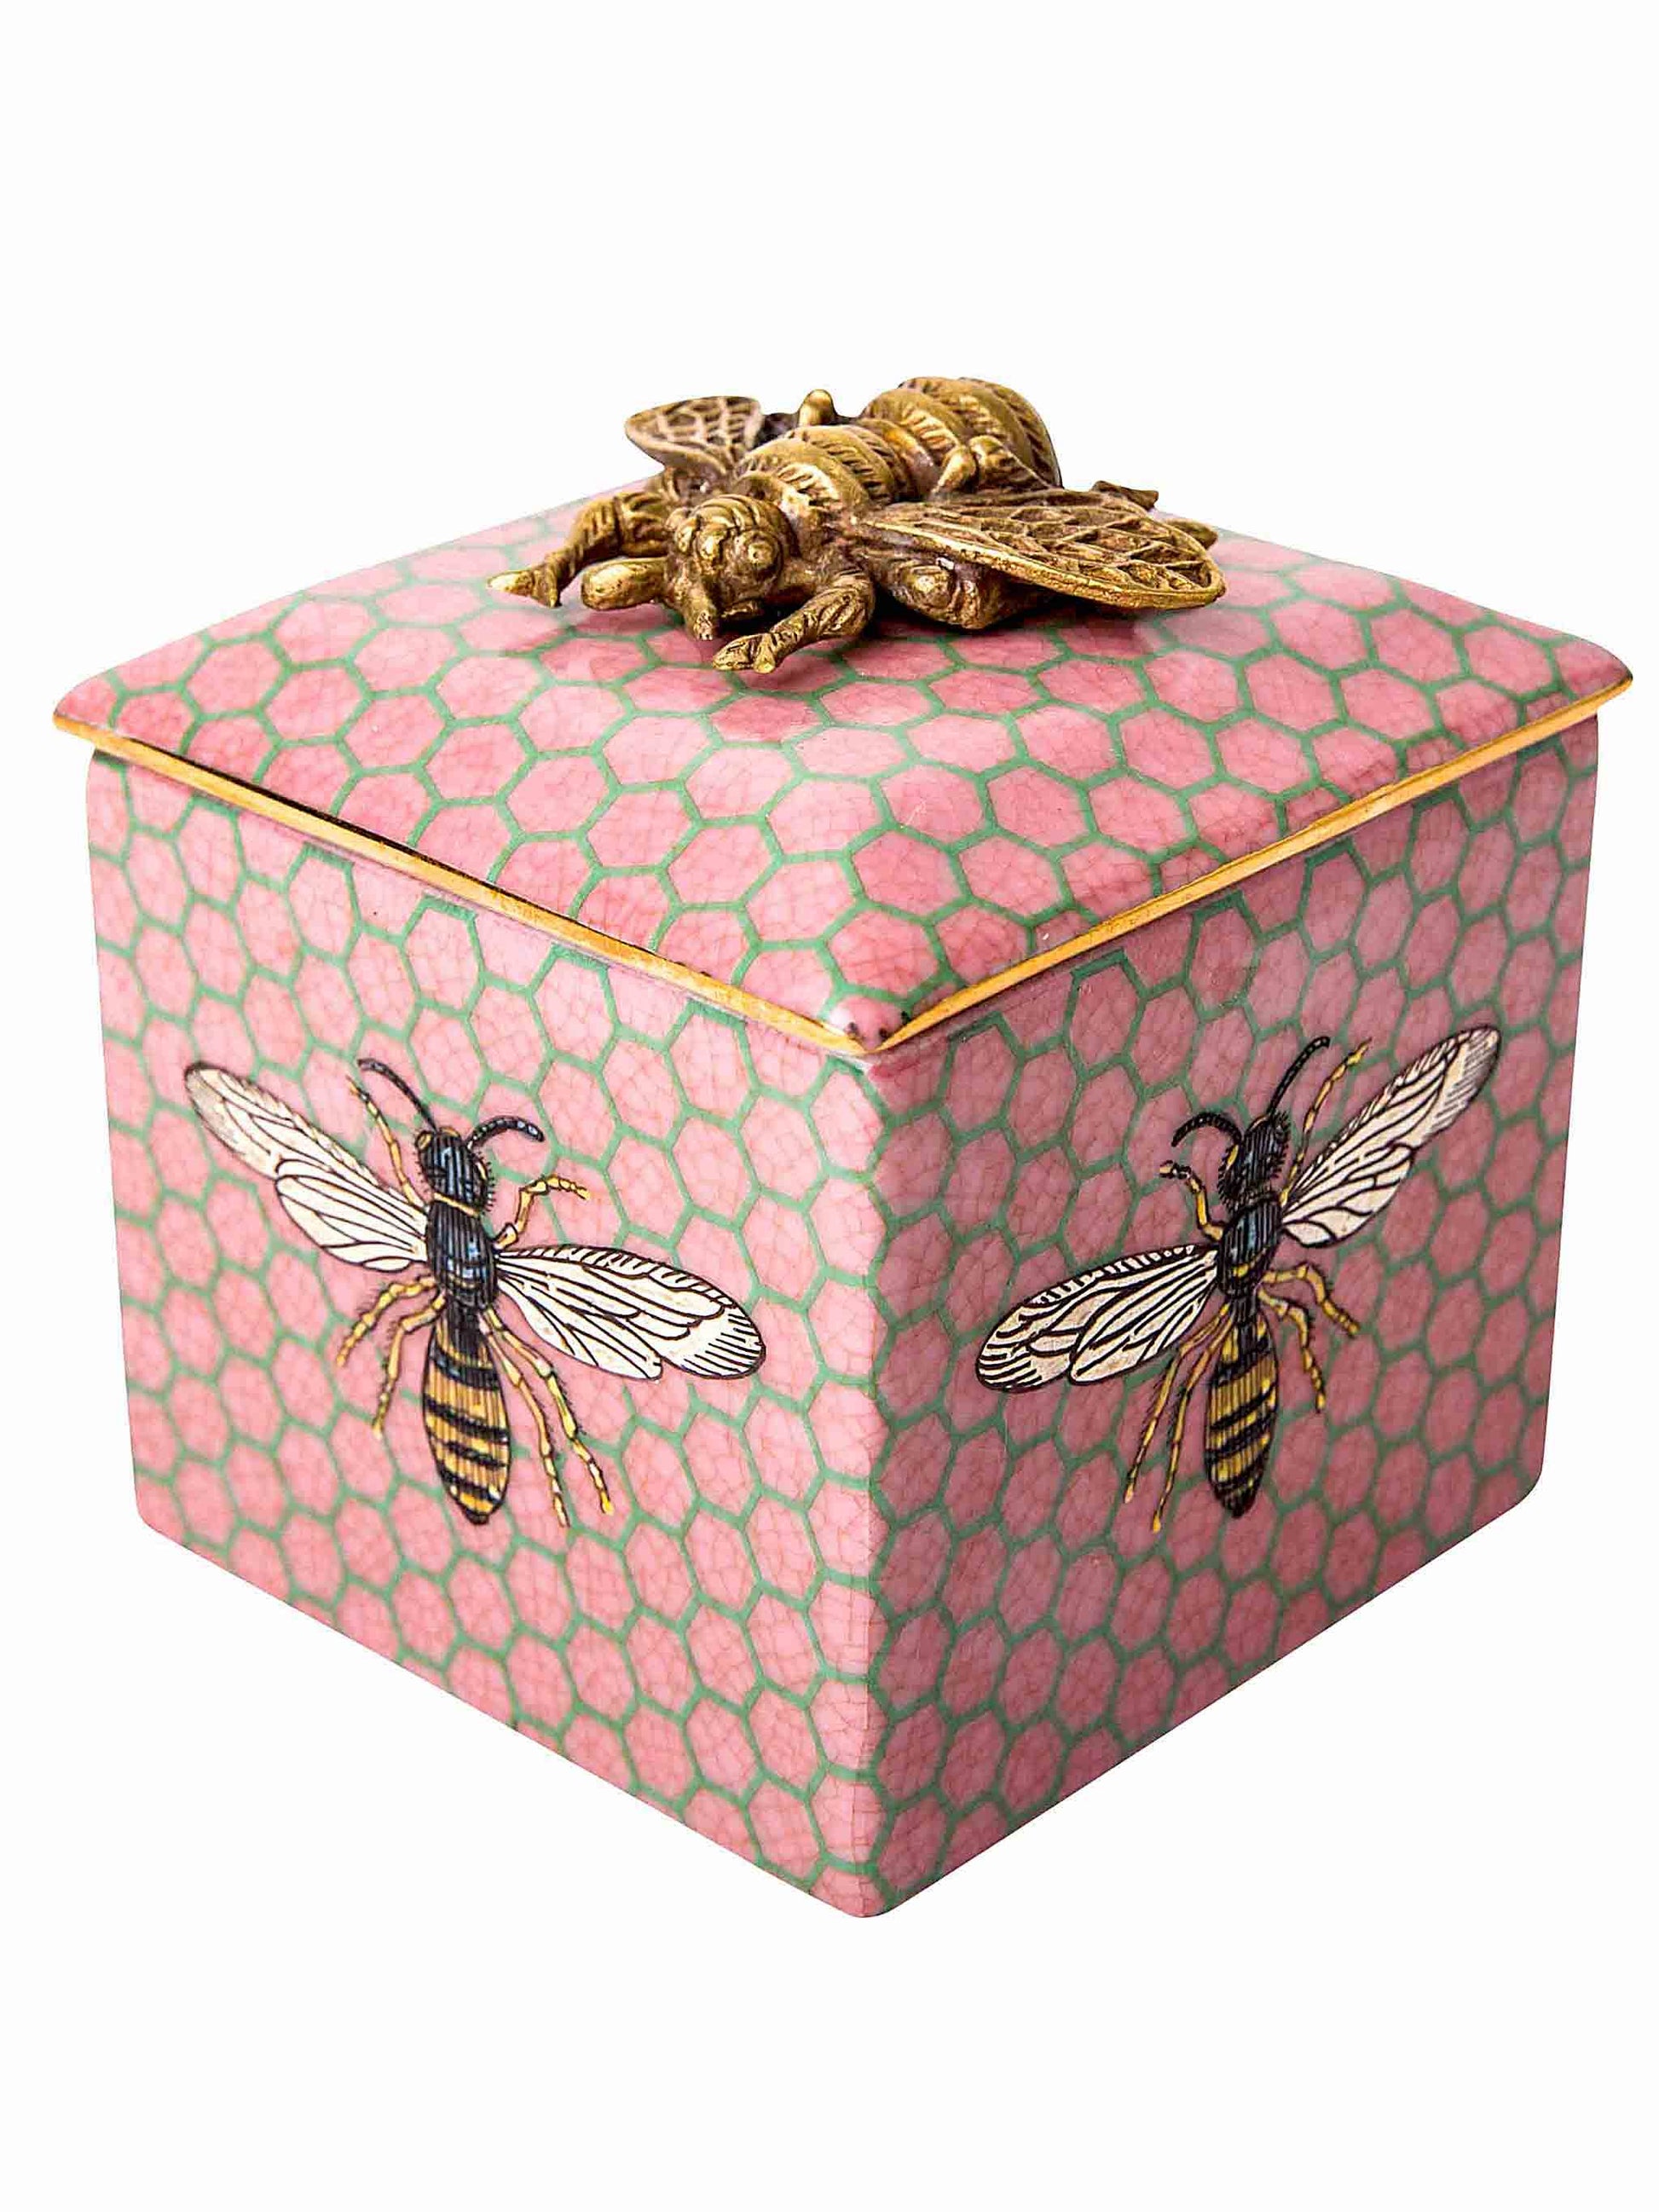 Porcelain Cube Trinket Box Palacio Abeja with Brass Bee Lid Pink by C.A.M